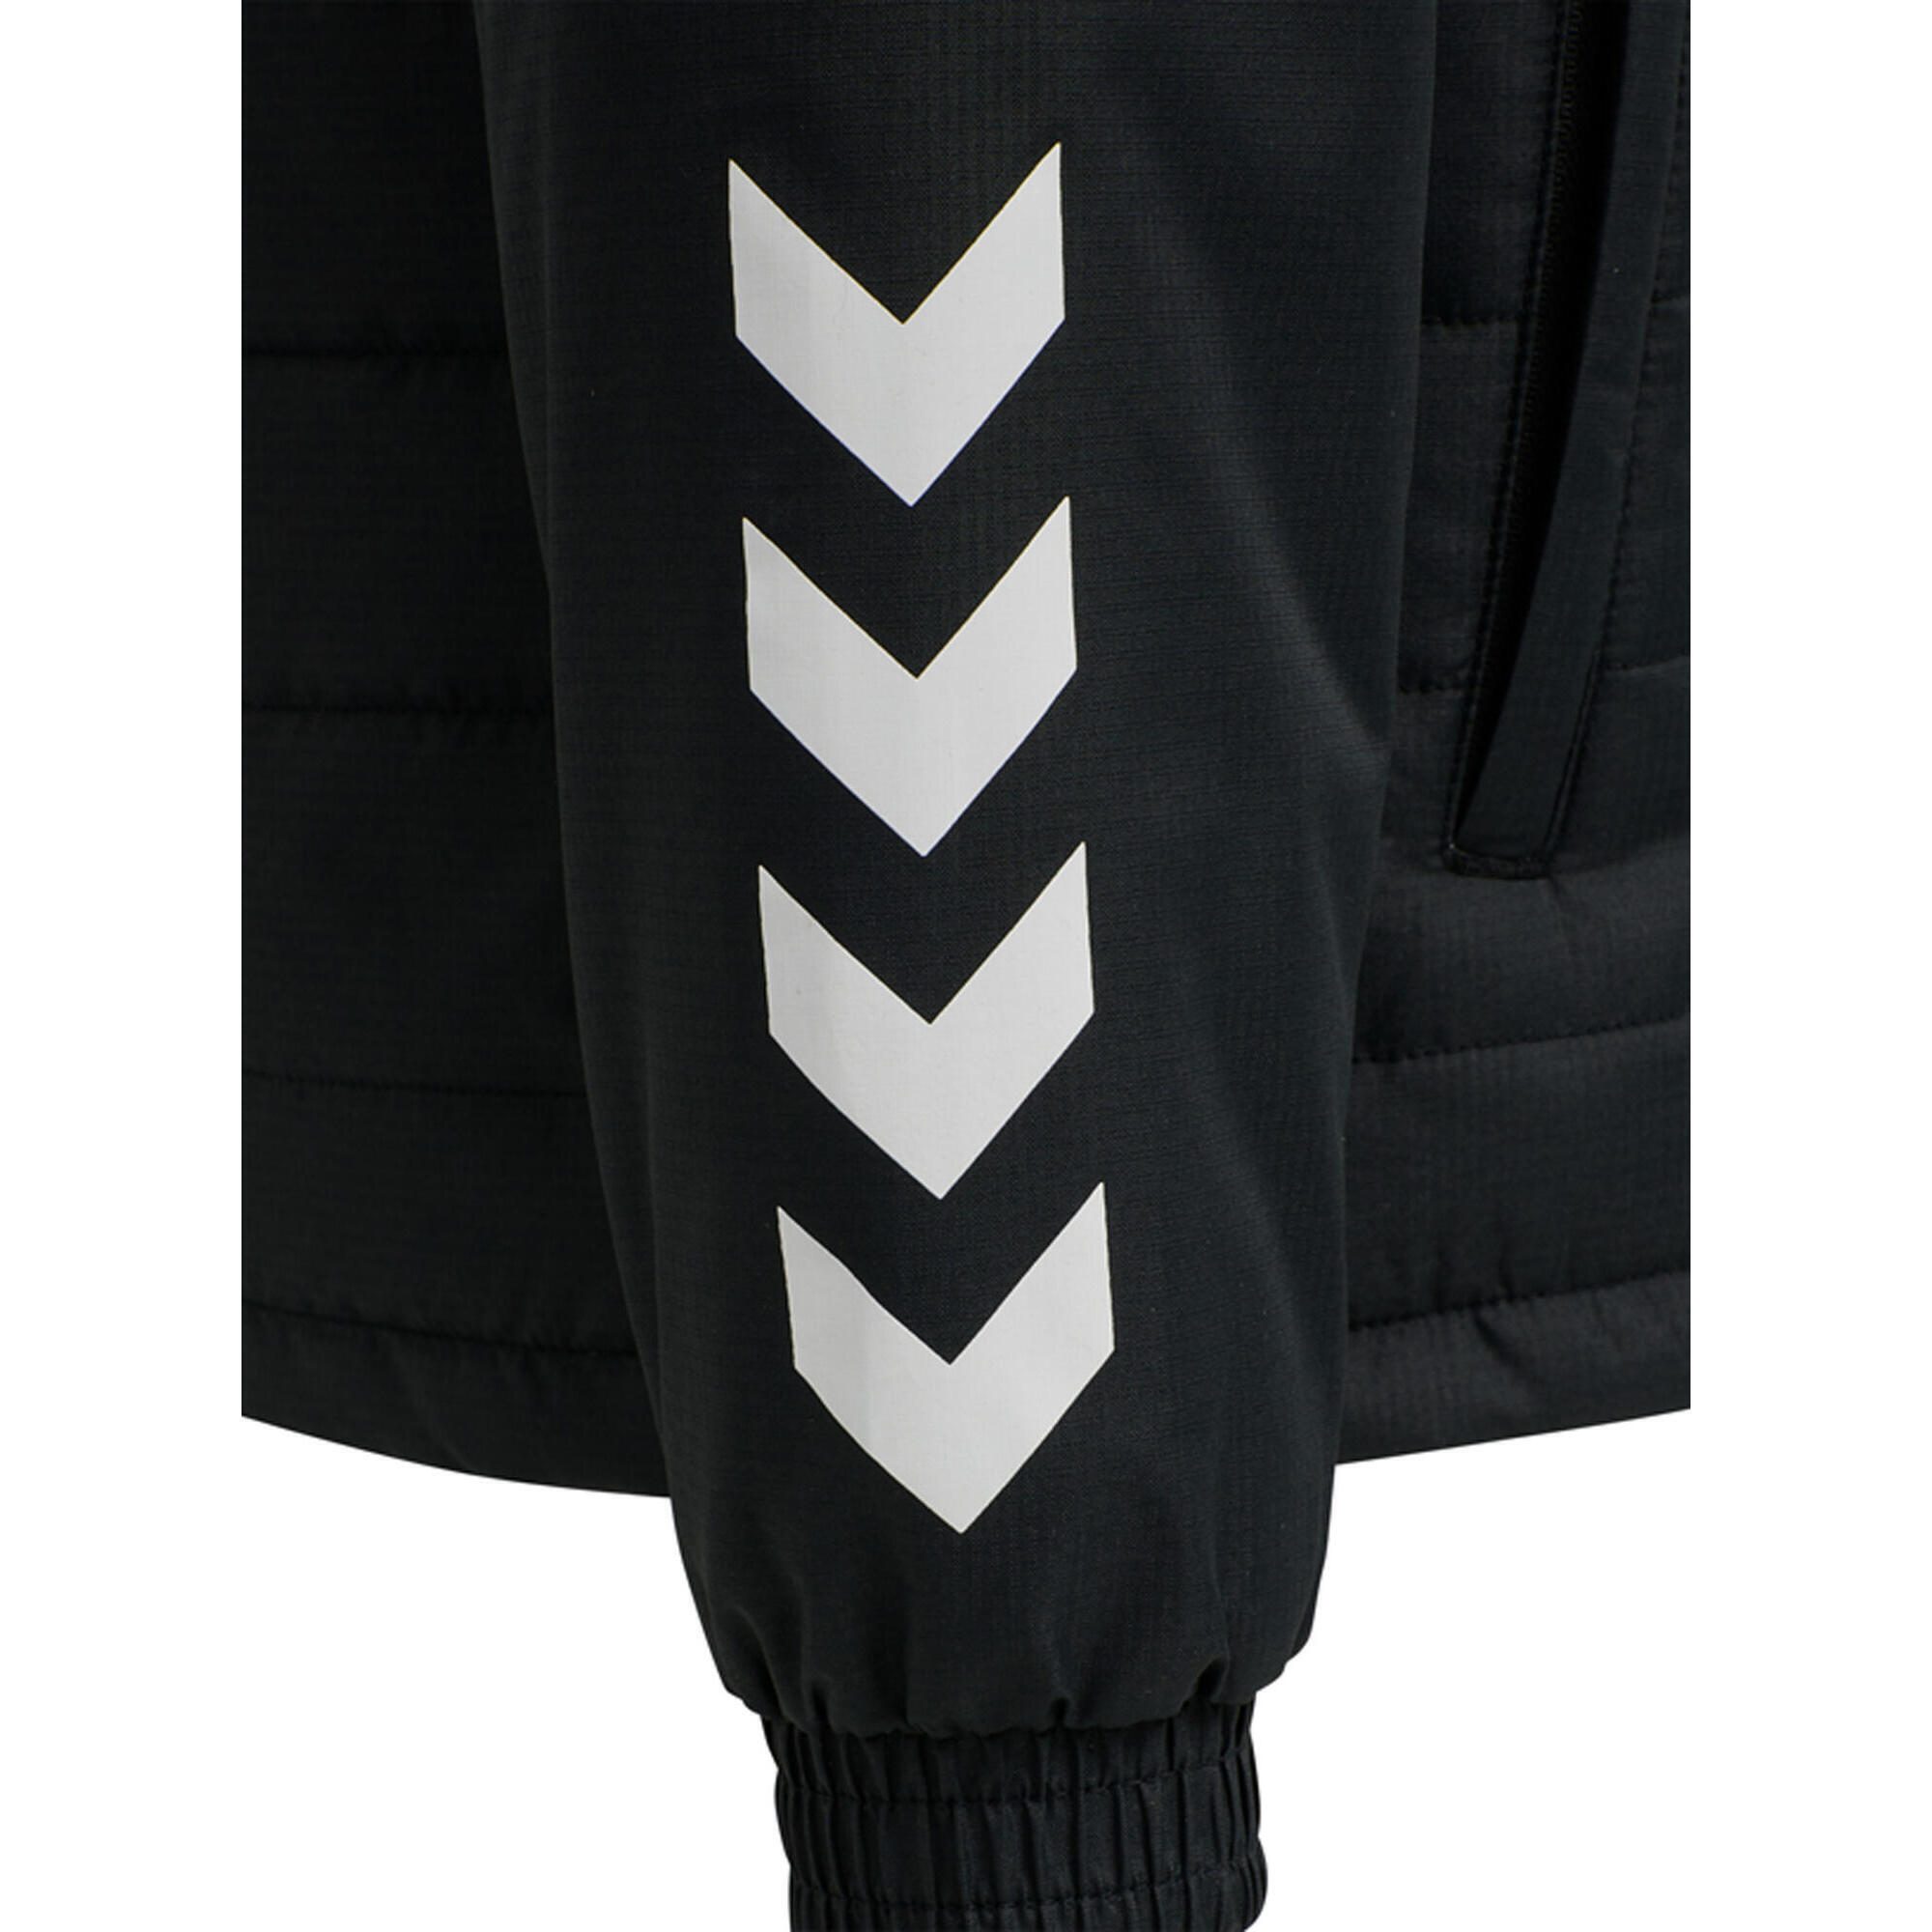 Short bench jacket for kids, great for football, in black 5/5